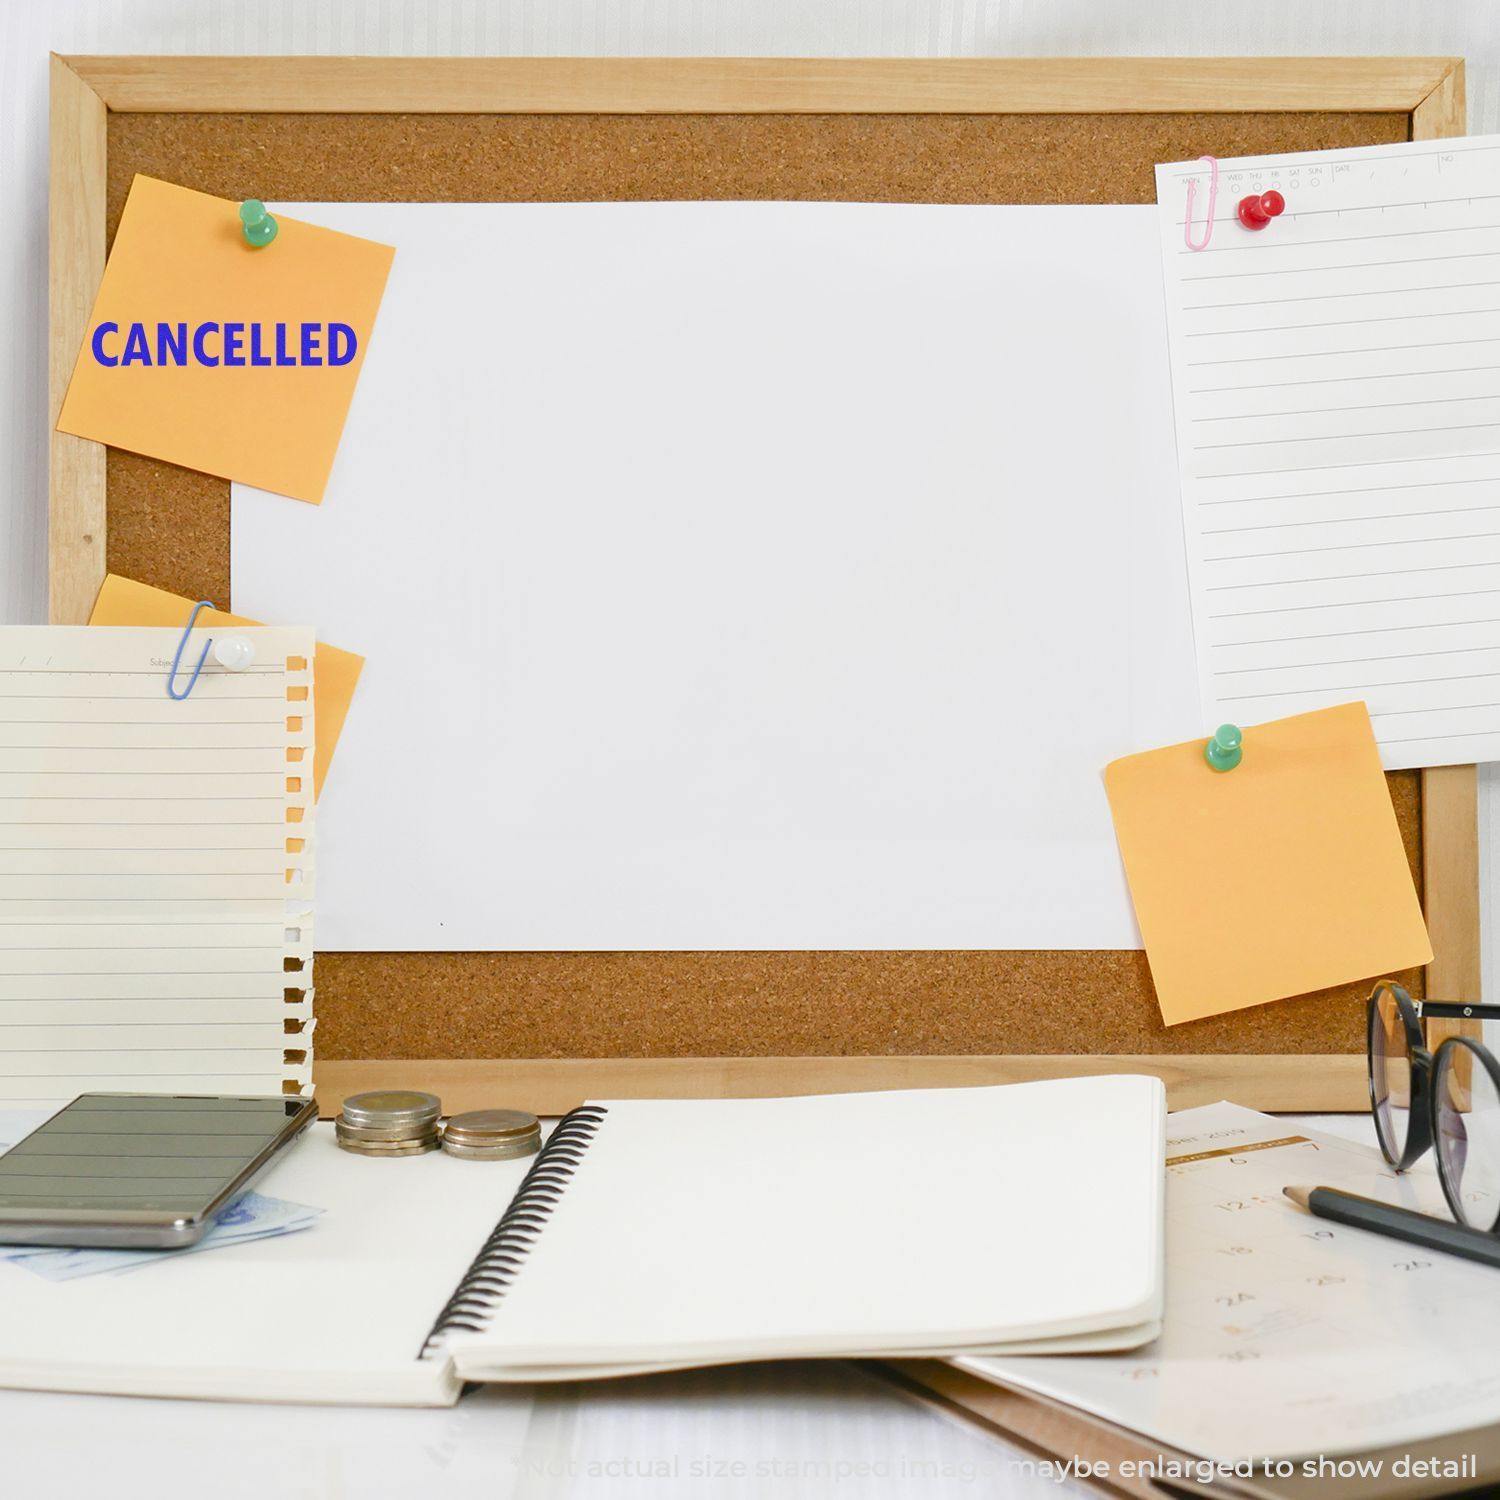 A large self-inking stamp with a stamped image showing how the text "CANCELLED" in a large bold font is displayed by it.